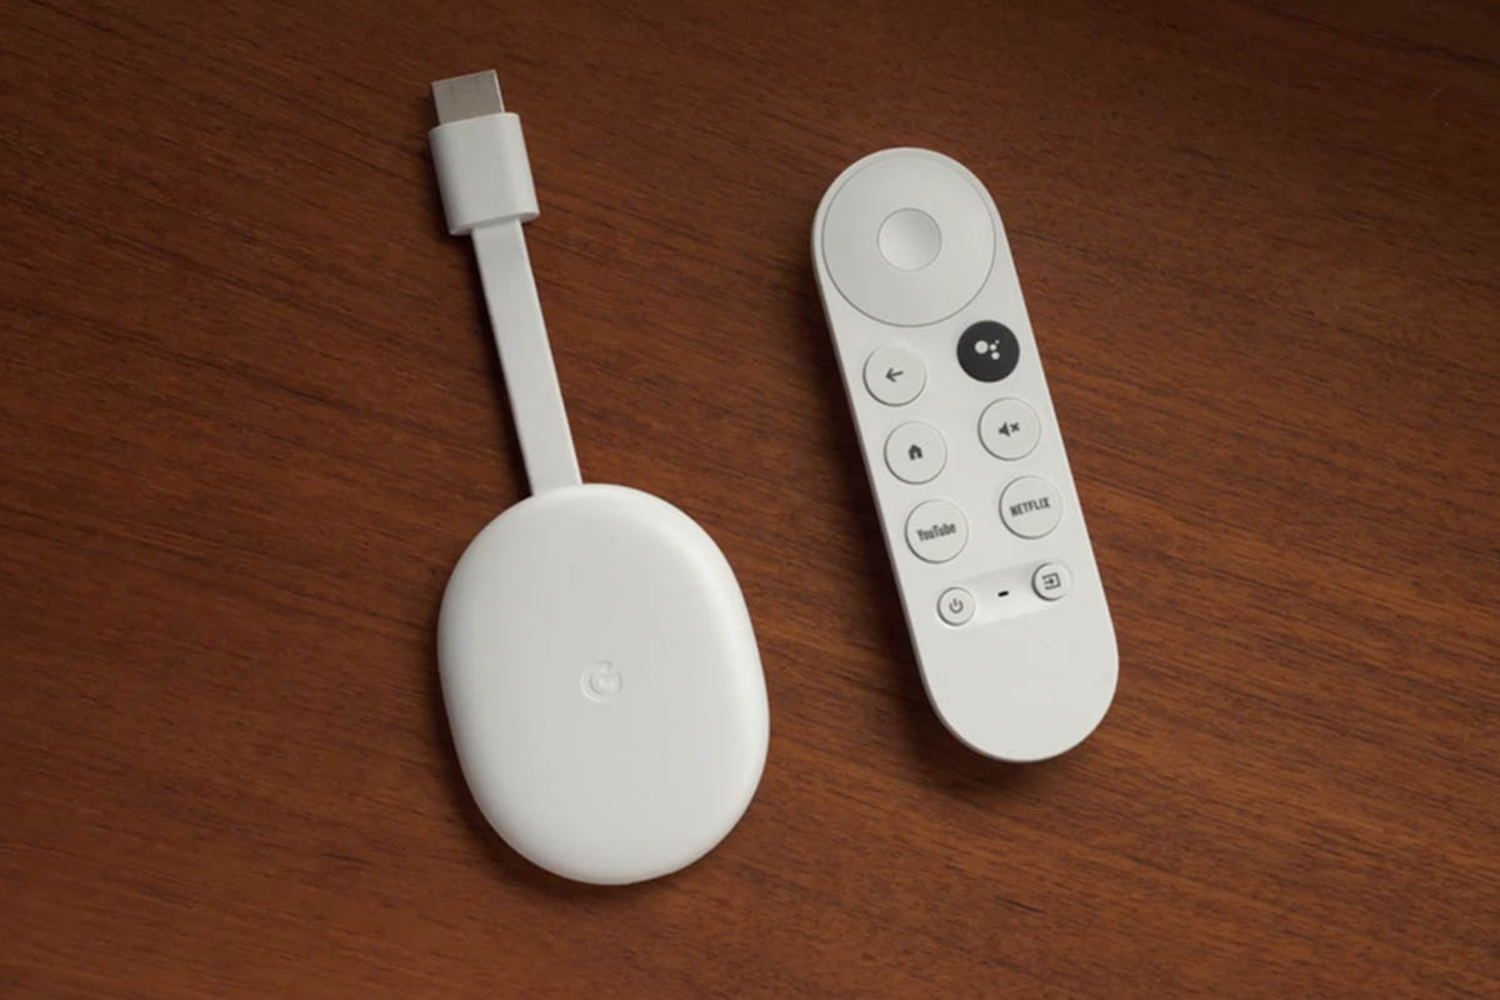 A white Chromecast and remote lie on table.